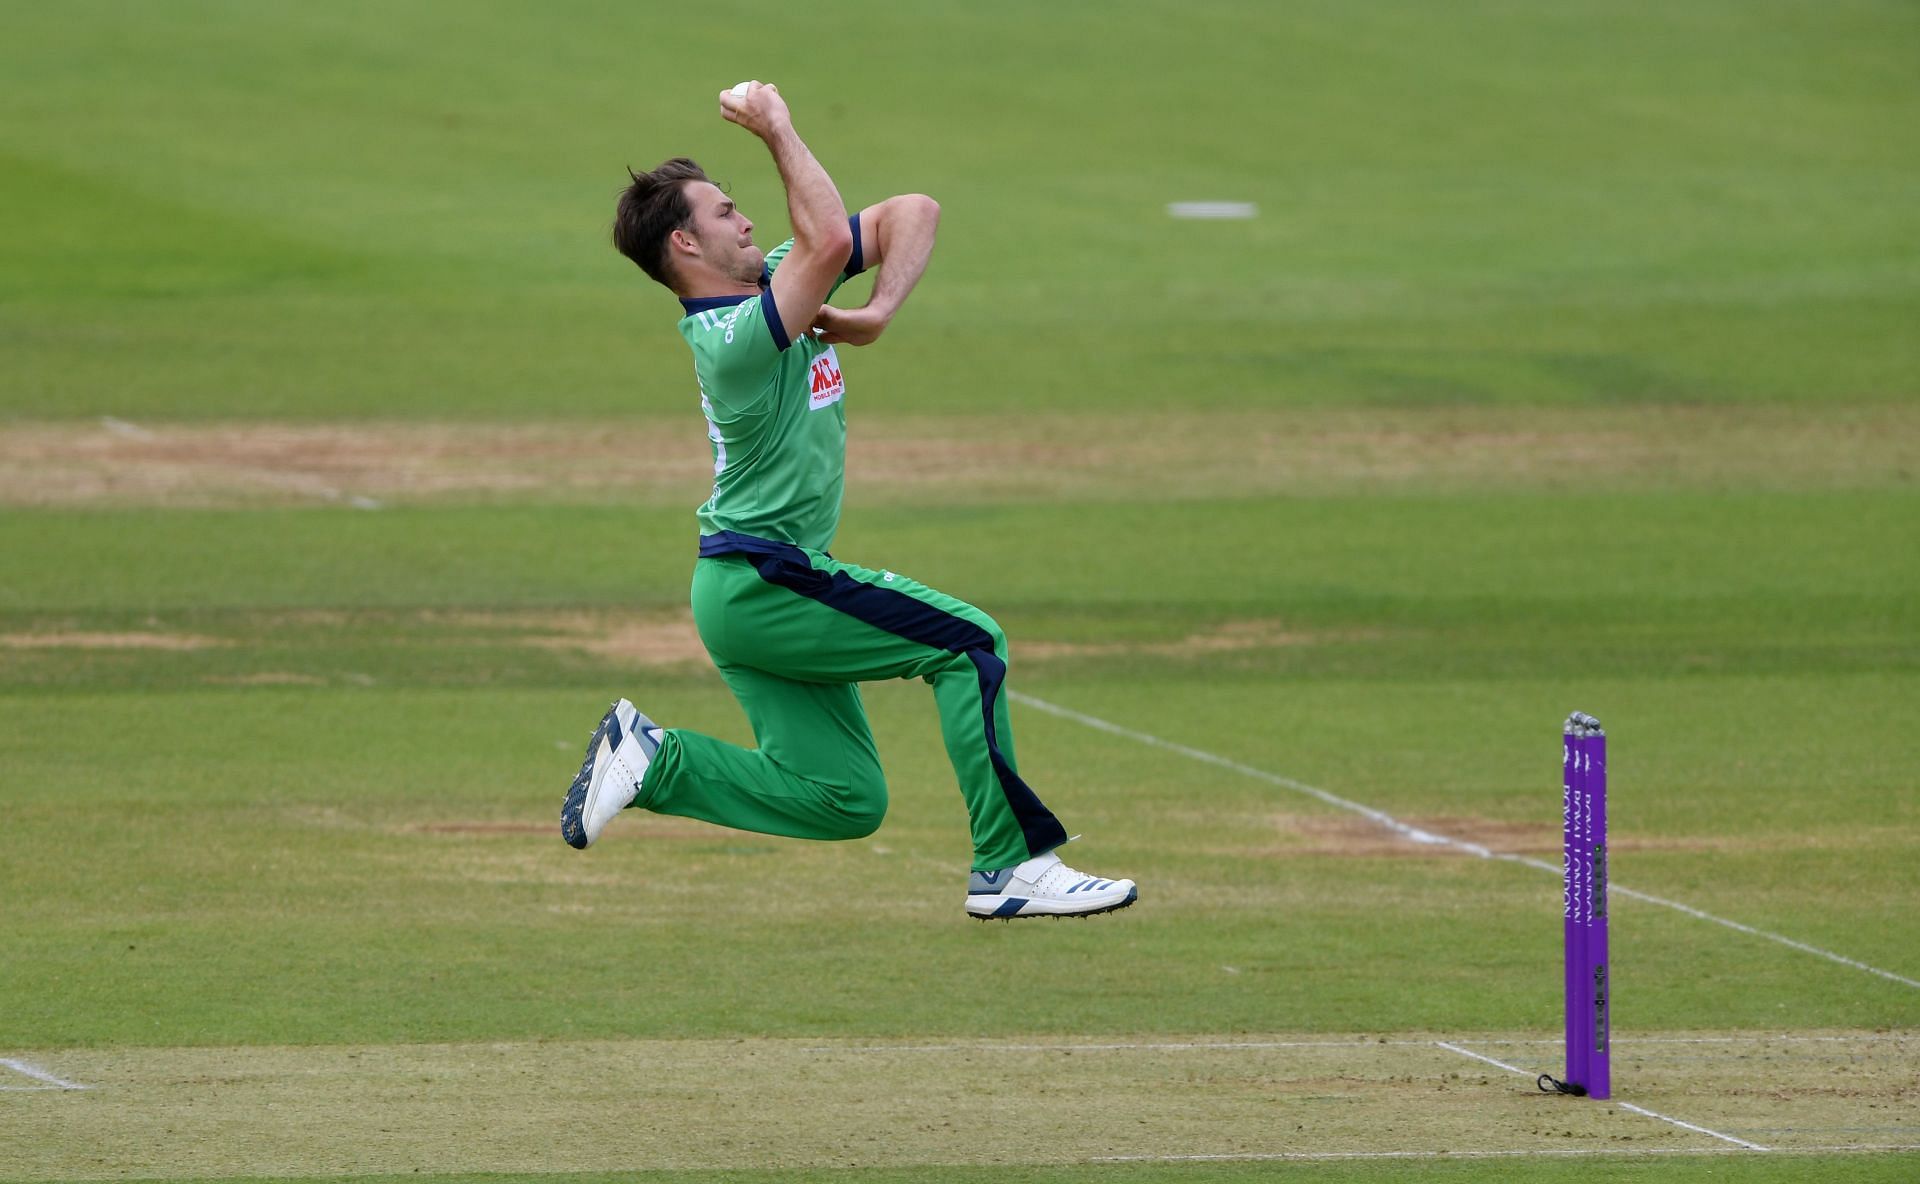 The third match of the Namibia A vs Ireland Wolves ODI series will be played on Friday